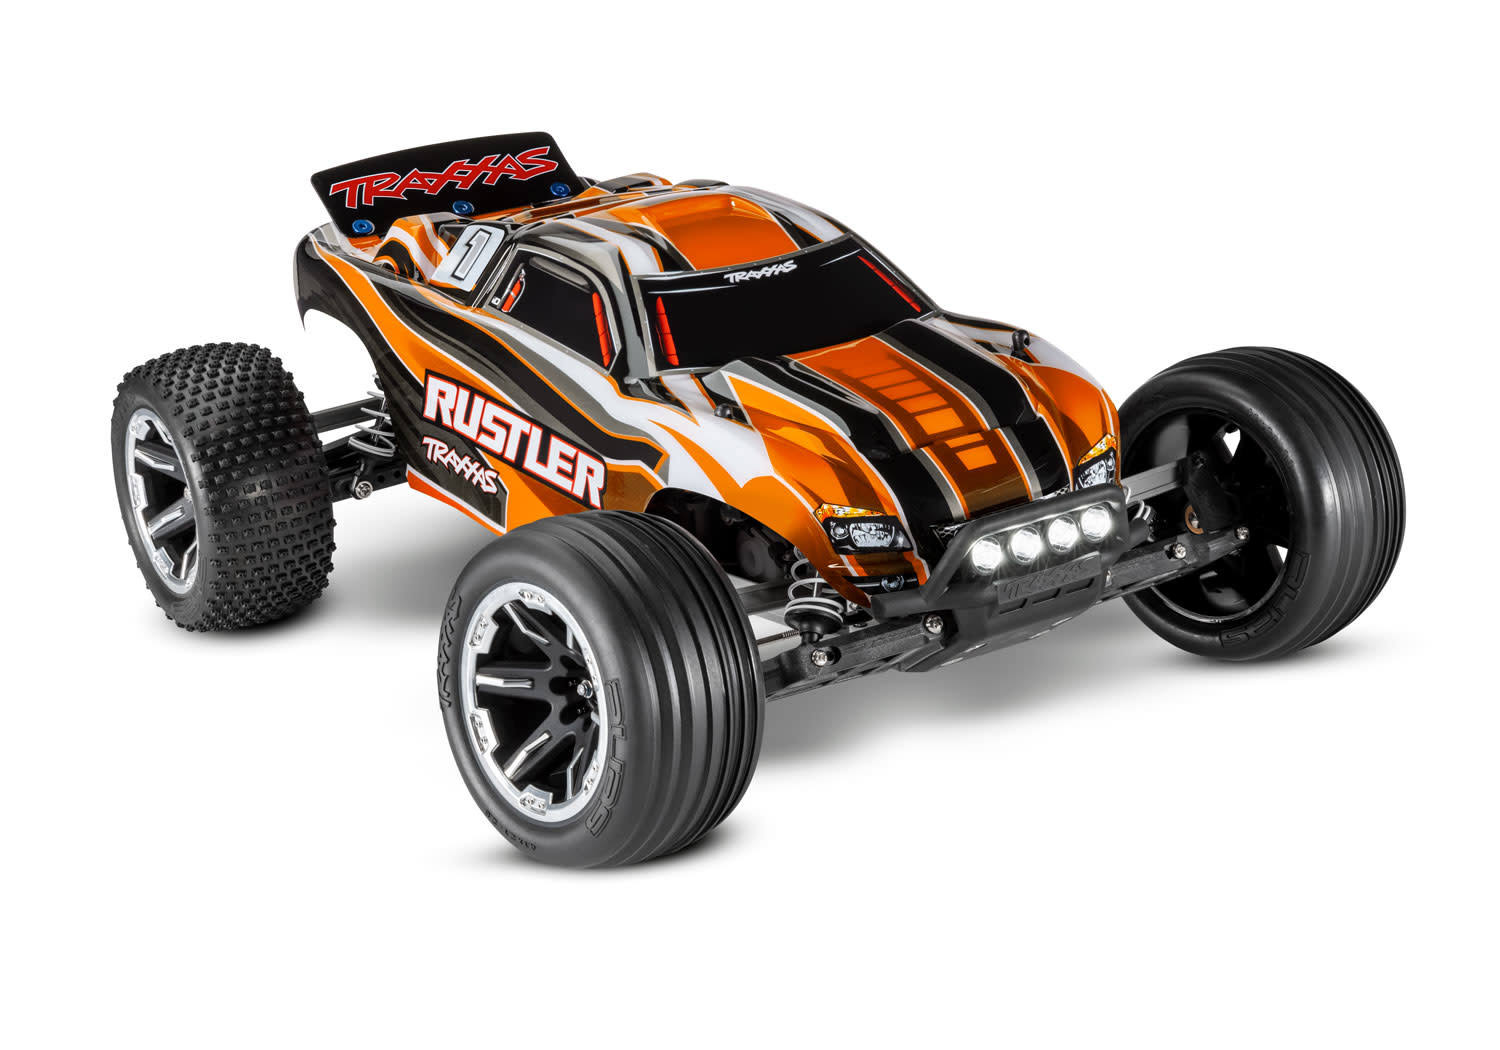 TRAXXAS TRA 37054-61-ORNG Rustler : 1/10 Scale Stadium Truck. Ready-To-Race with TQ 2.4GHz radio system, XL-5 ESC (fwd/rev), and LED lights. Includes: